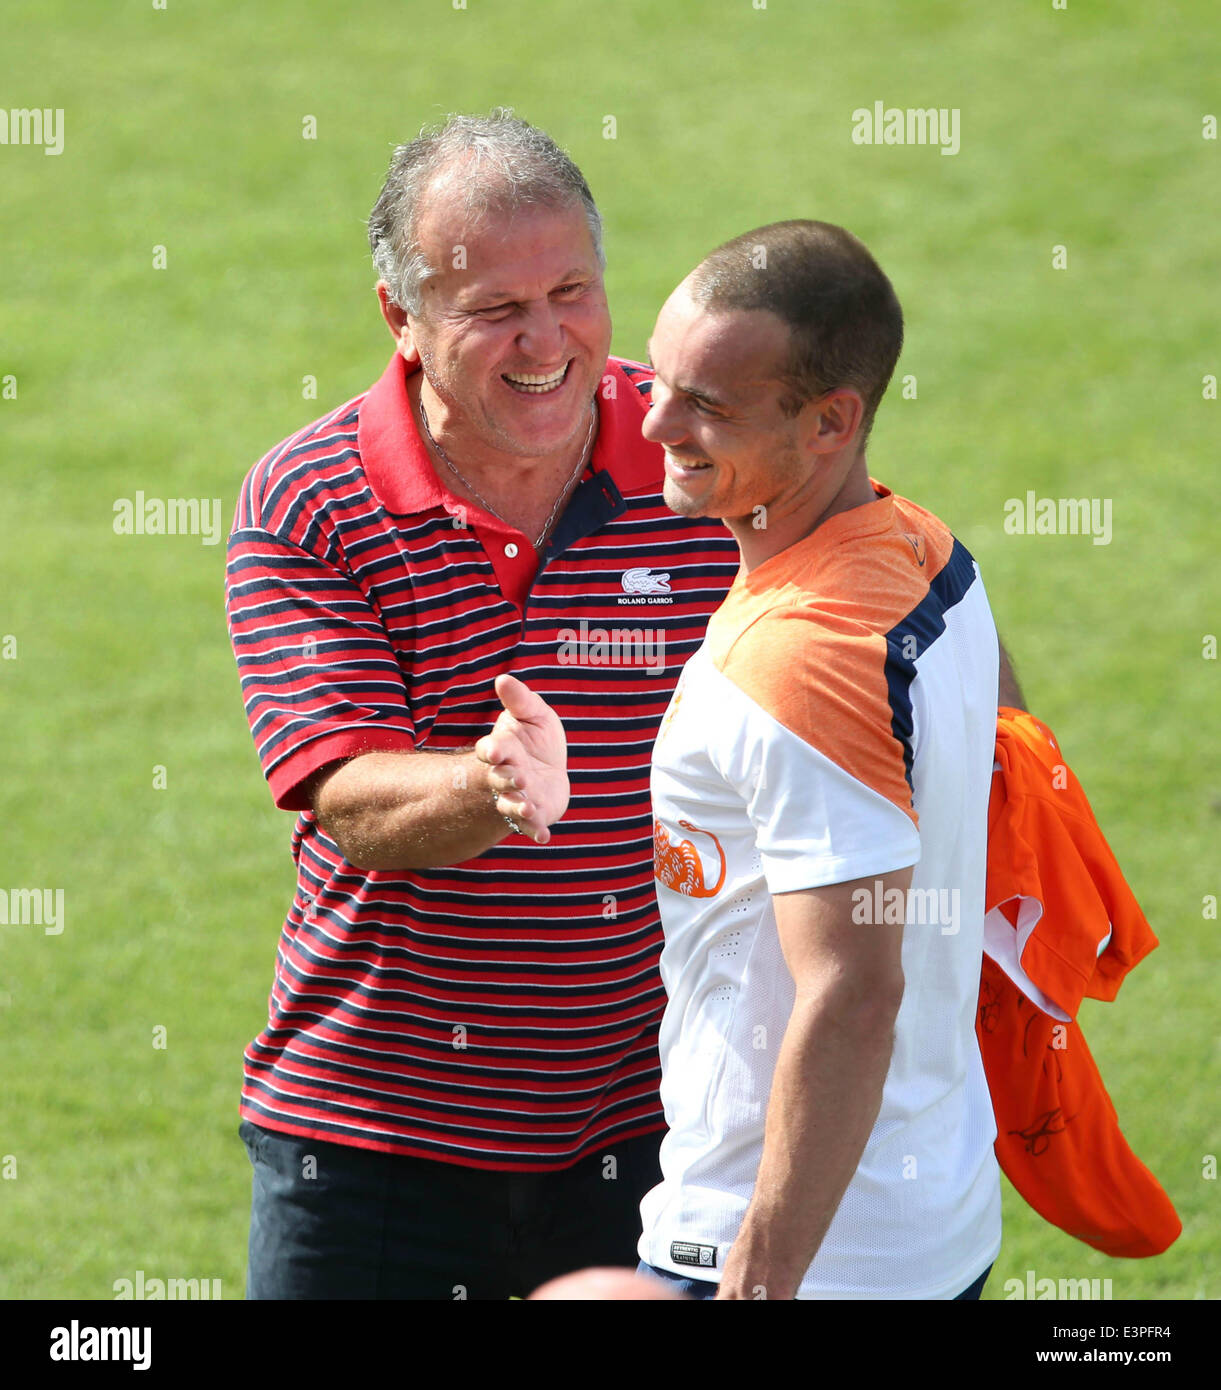 Rio De Janeiro, Brazil. 26th June, 2014. Netherlands' Wesley Sneijder (R) talks with Brazil's former player Zico in a training session in Rio de Janeiro, Brazil, June 26, 2014. © TELAM/Xinhua/Alamy Live News Stock Photo